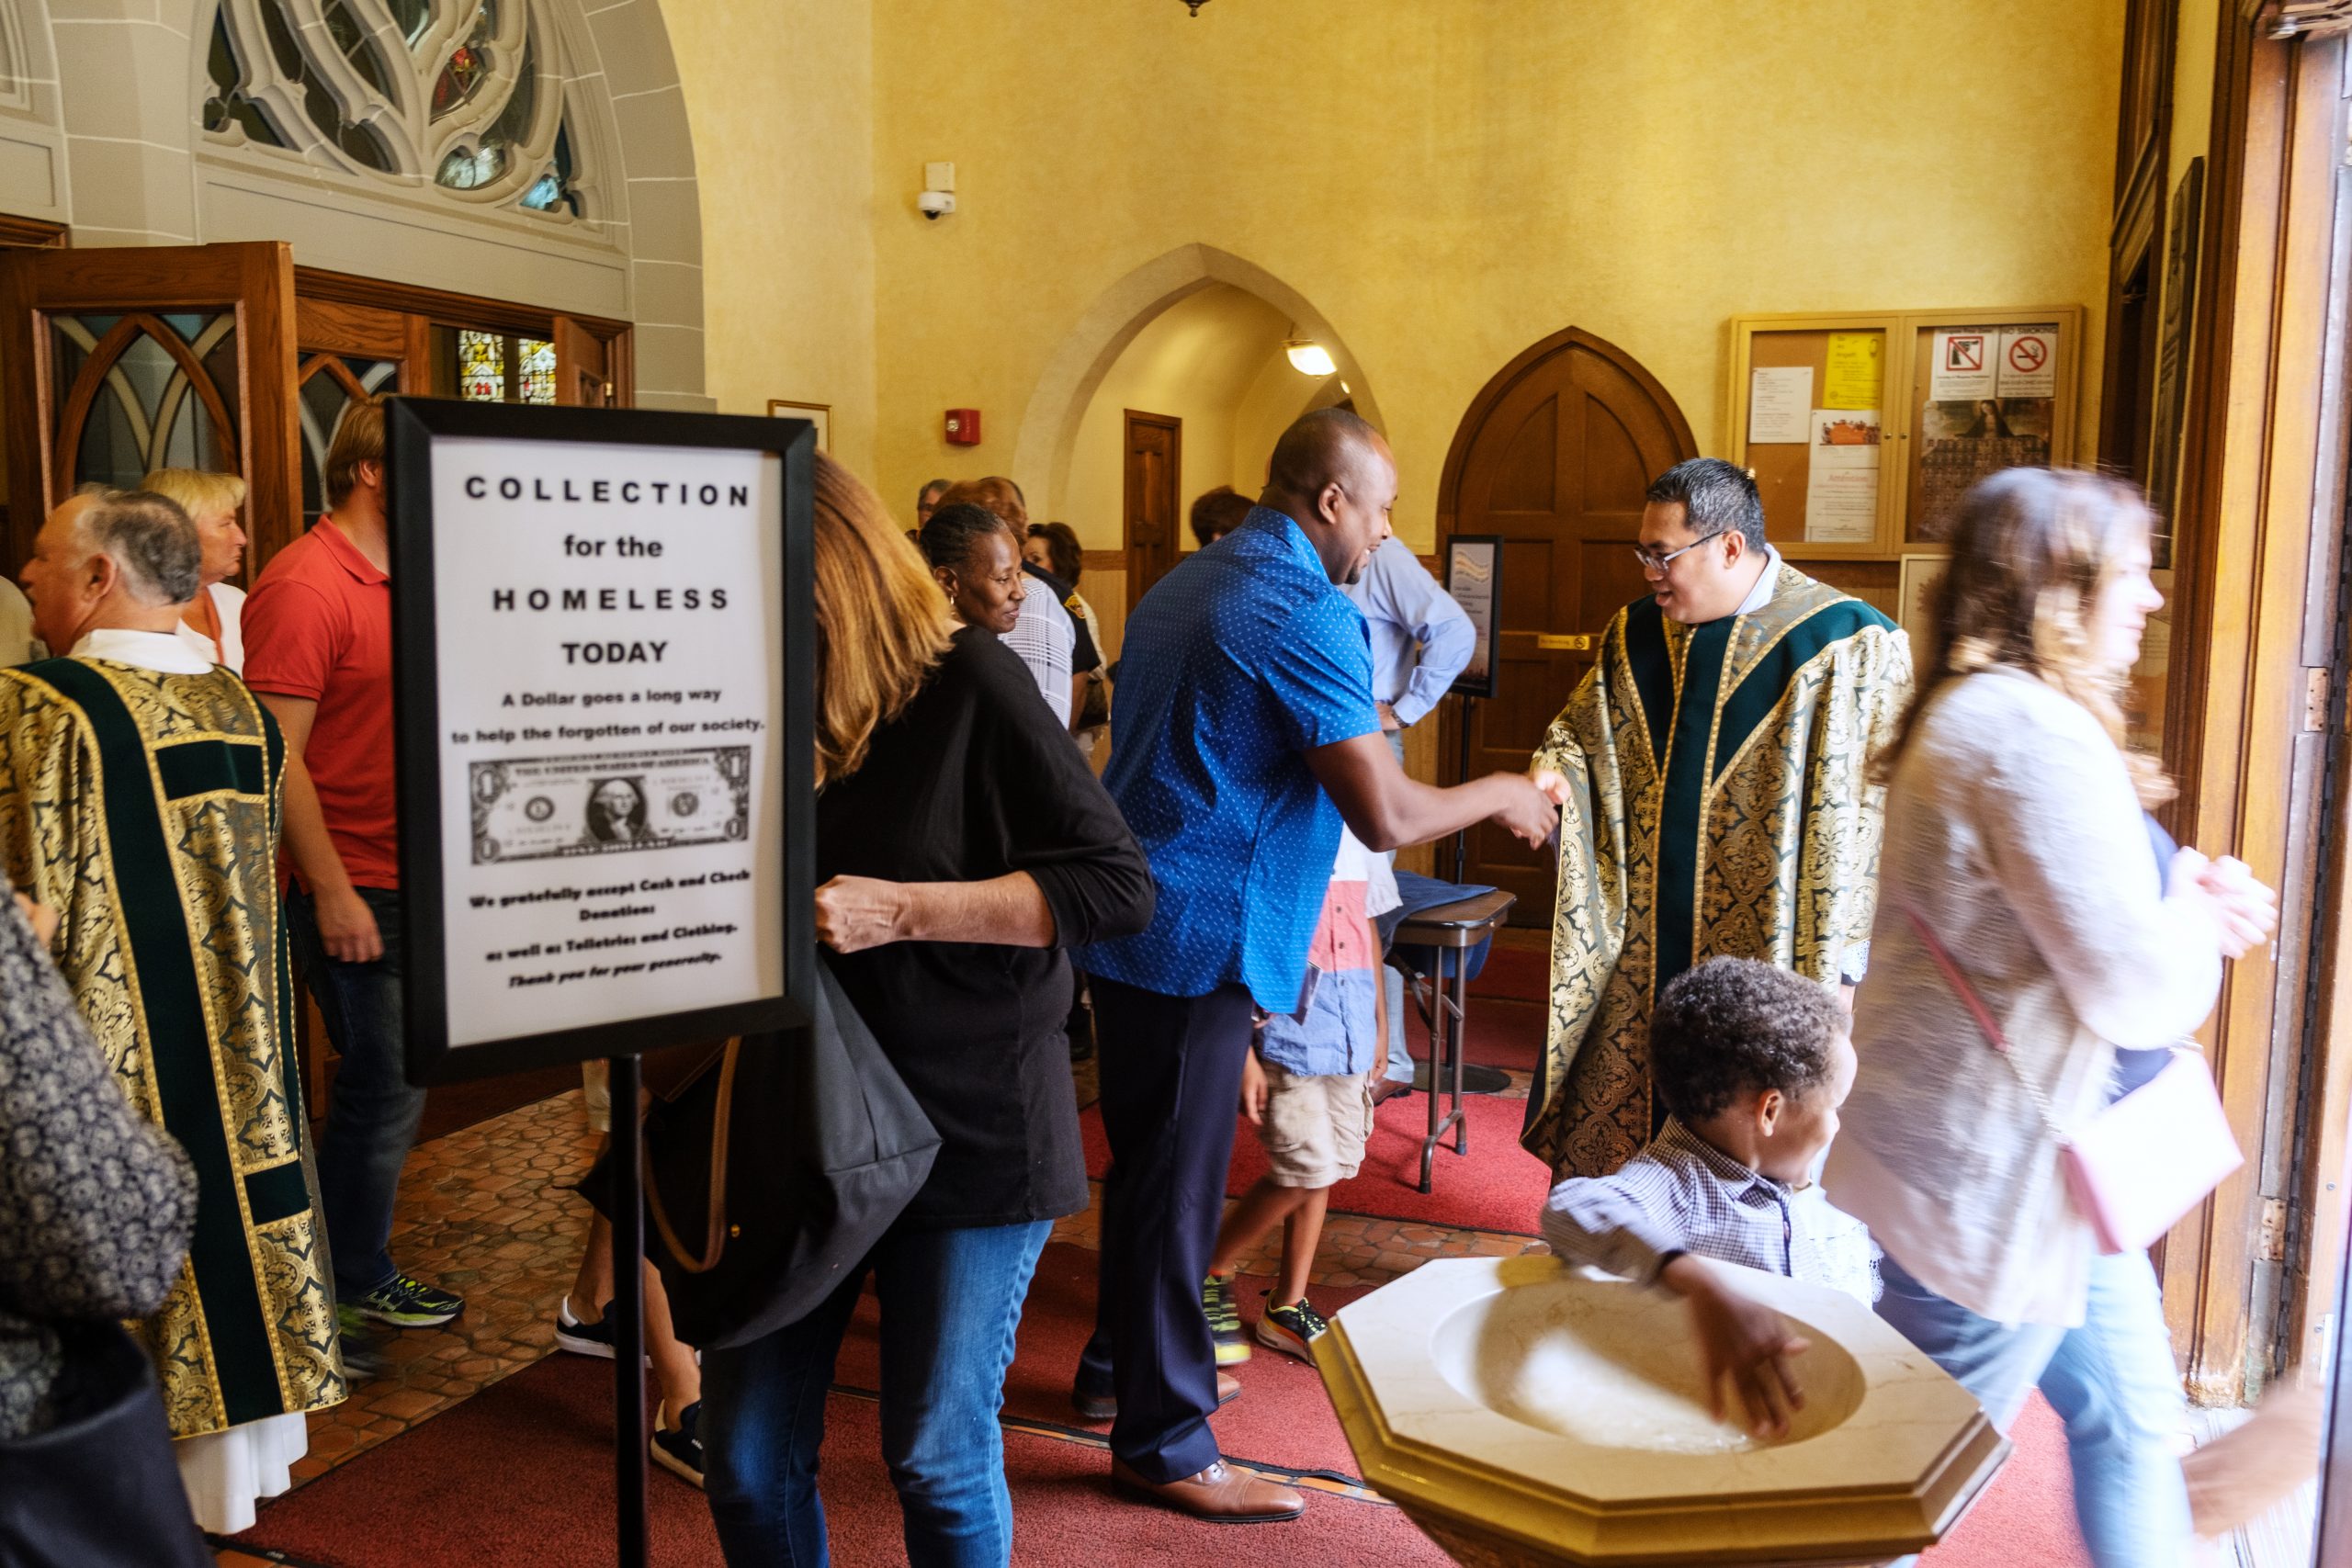 People in the entrance of a church and a sign that reads "Collection for the Homeless Today"